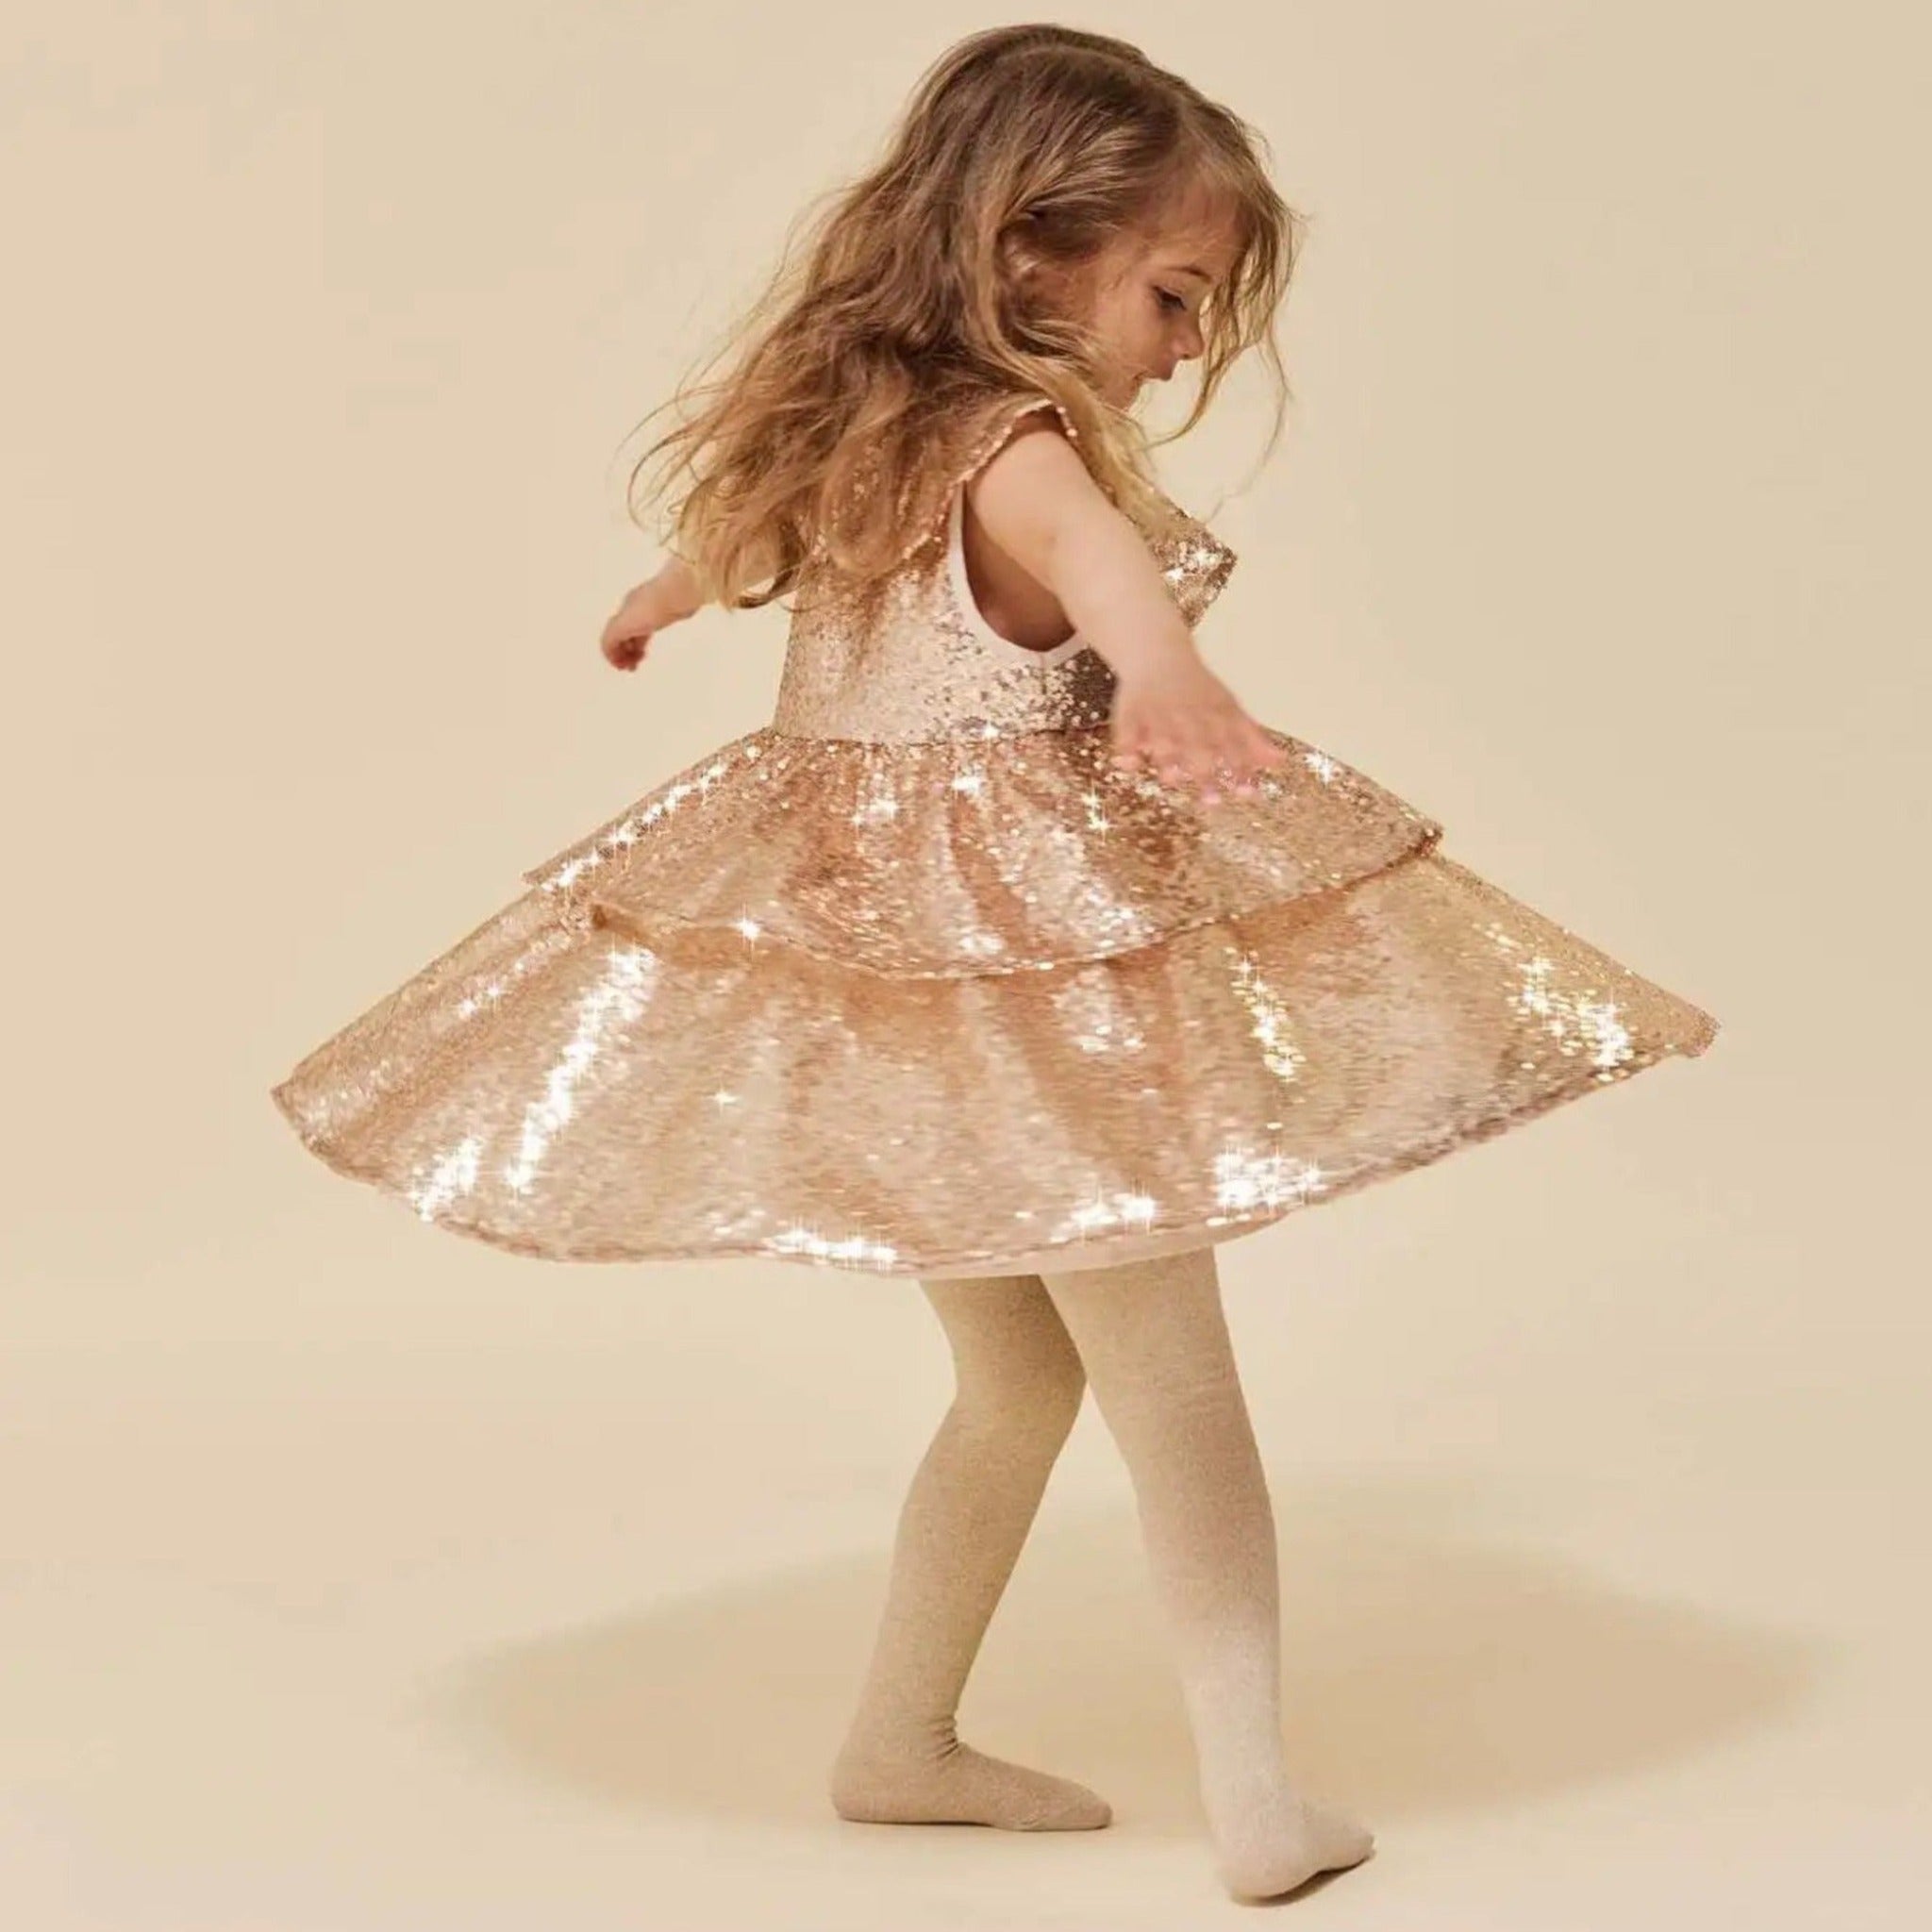 Sparkling Girls' Party Dress